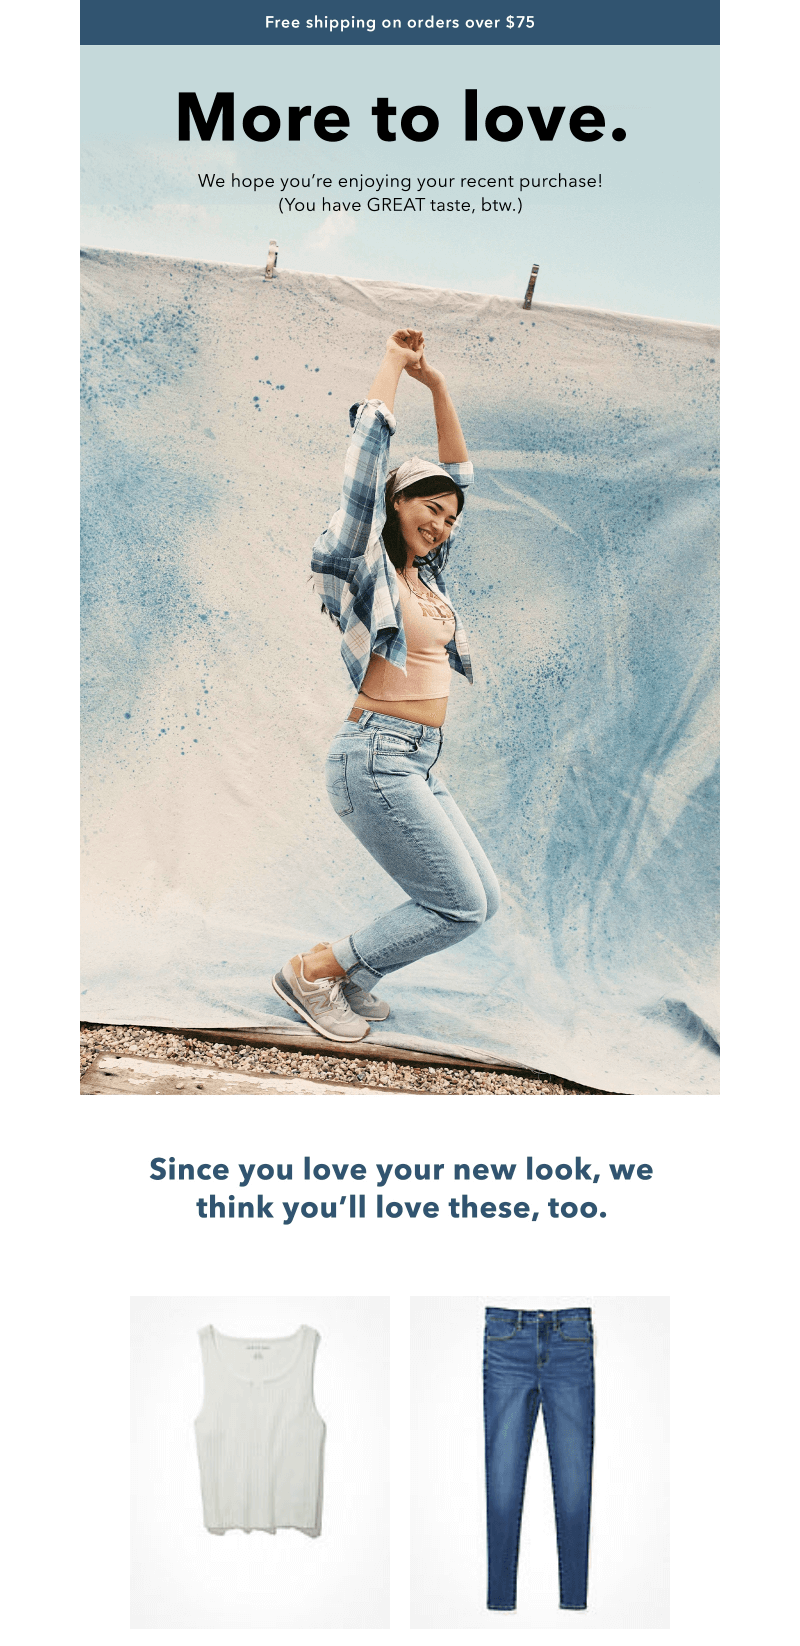 A message from American Eagle with a model posing and personalized pieces of clothing and a campaign tagline “More to love.”